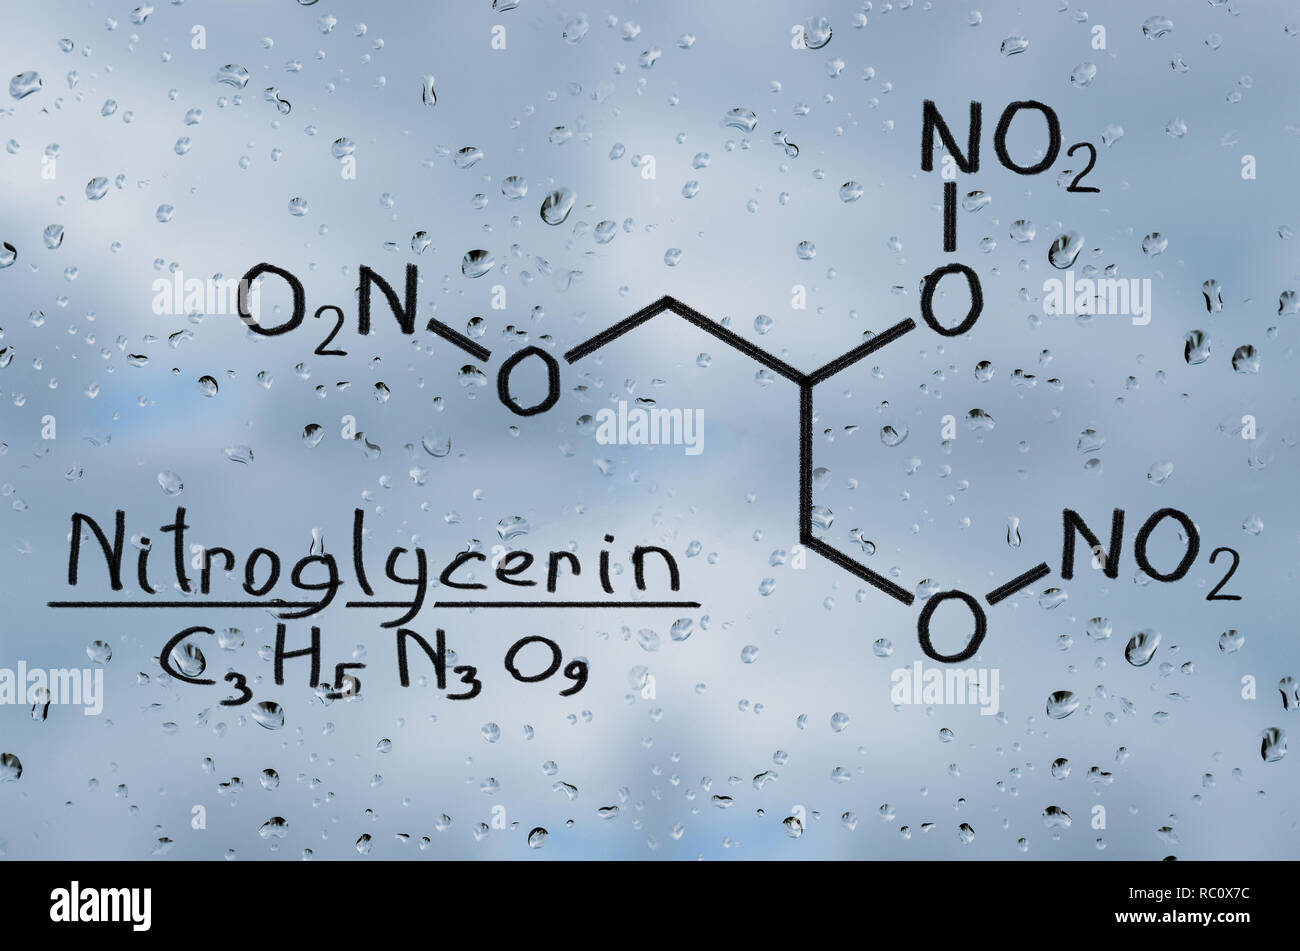 Structural model of Nitroglycerine on the glass with raindrops. Stock Photo